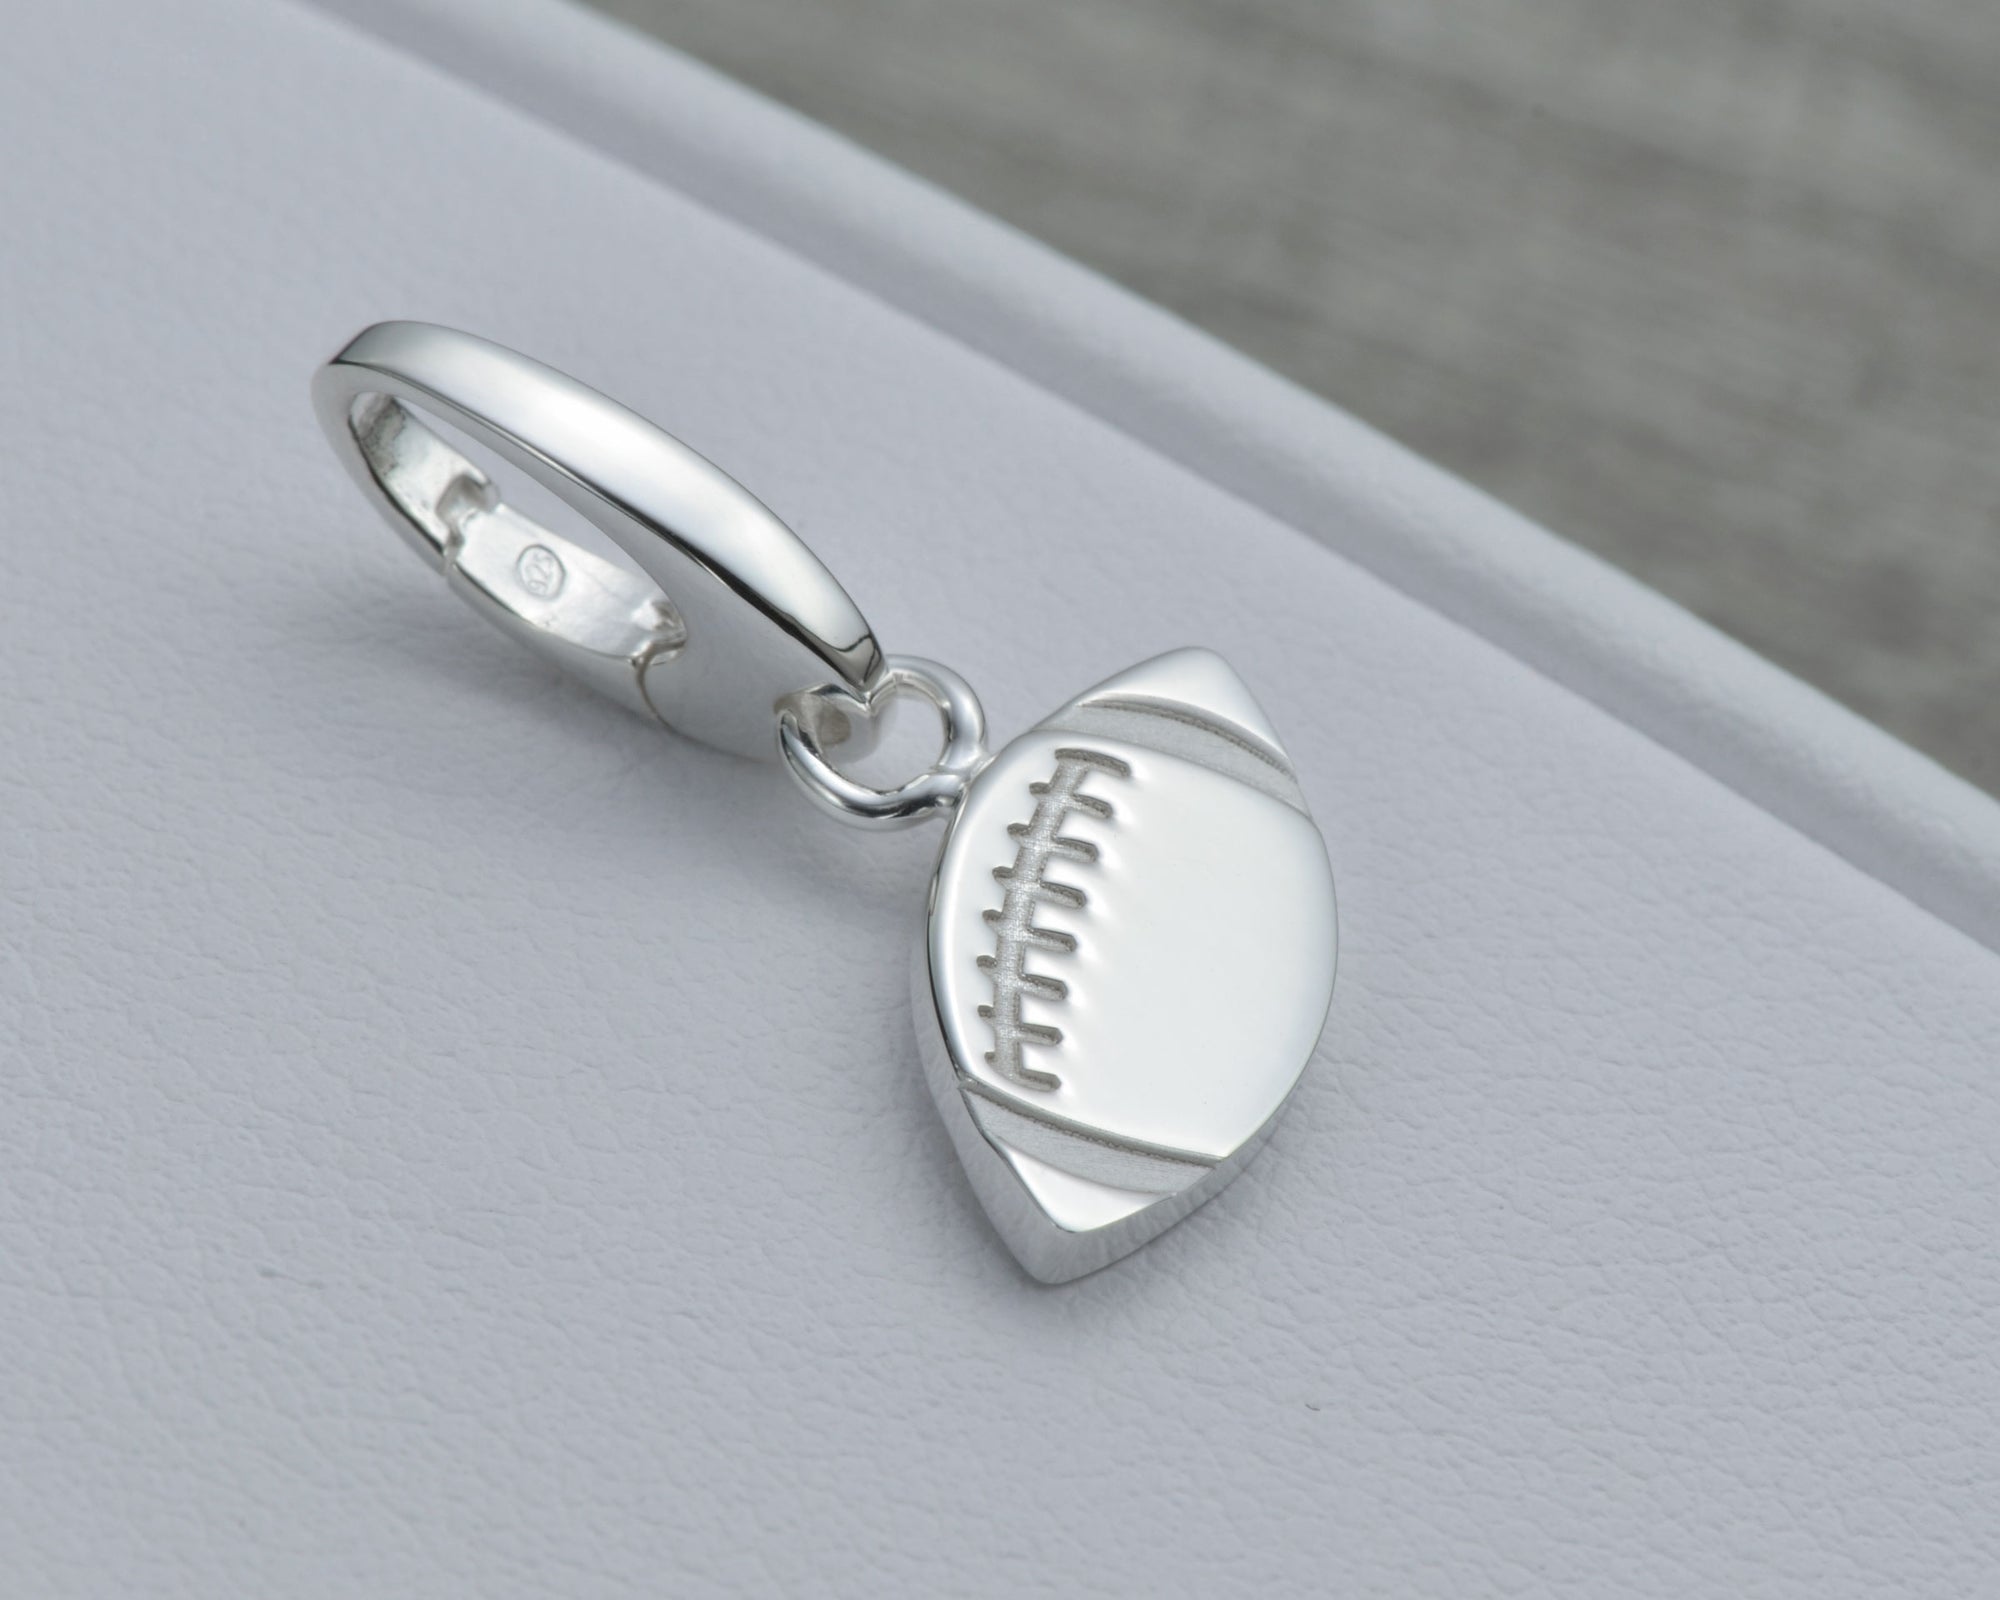 FOOTBALL CHARM IN STERLING SILVER